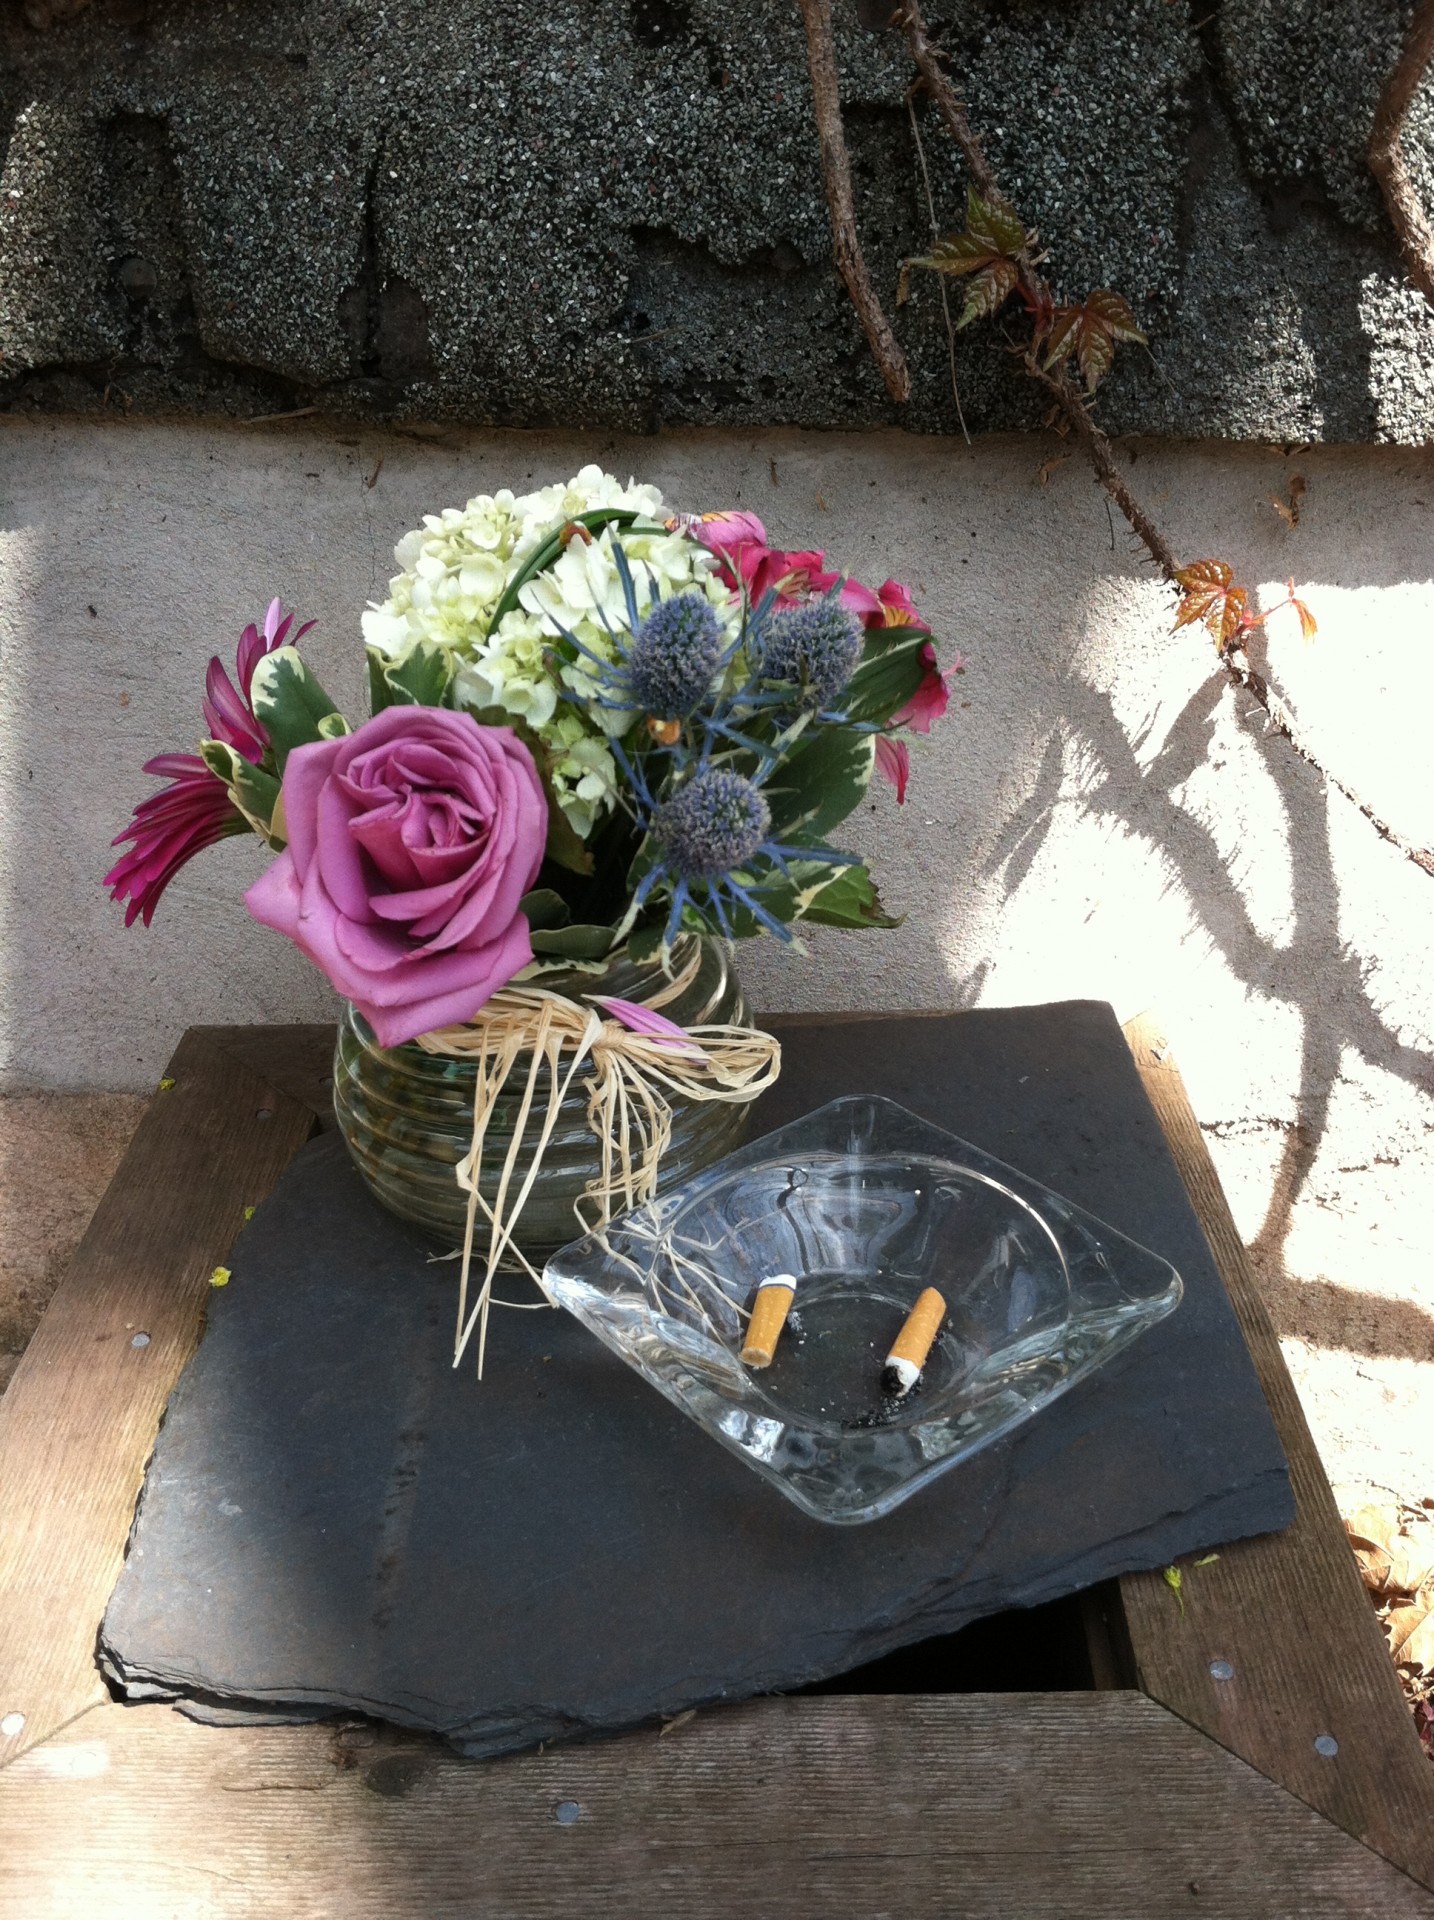 A small vase of pretty flowers sit by an ashtray holding some cigarette butts